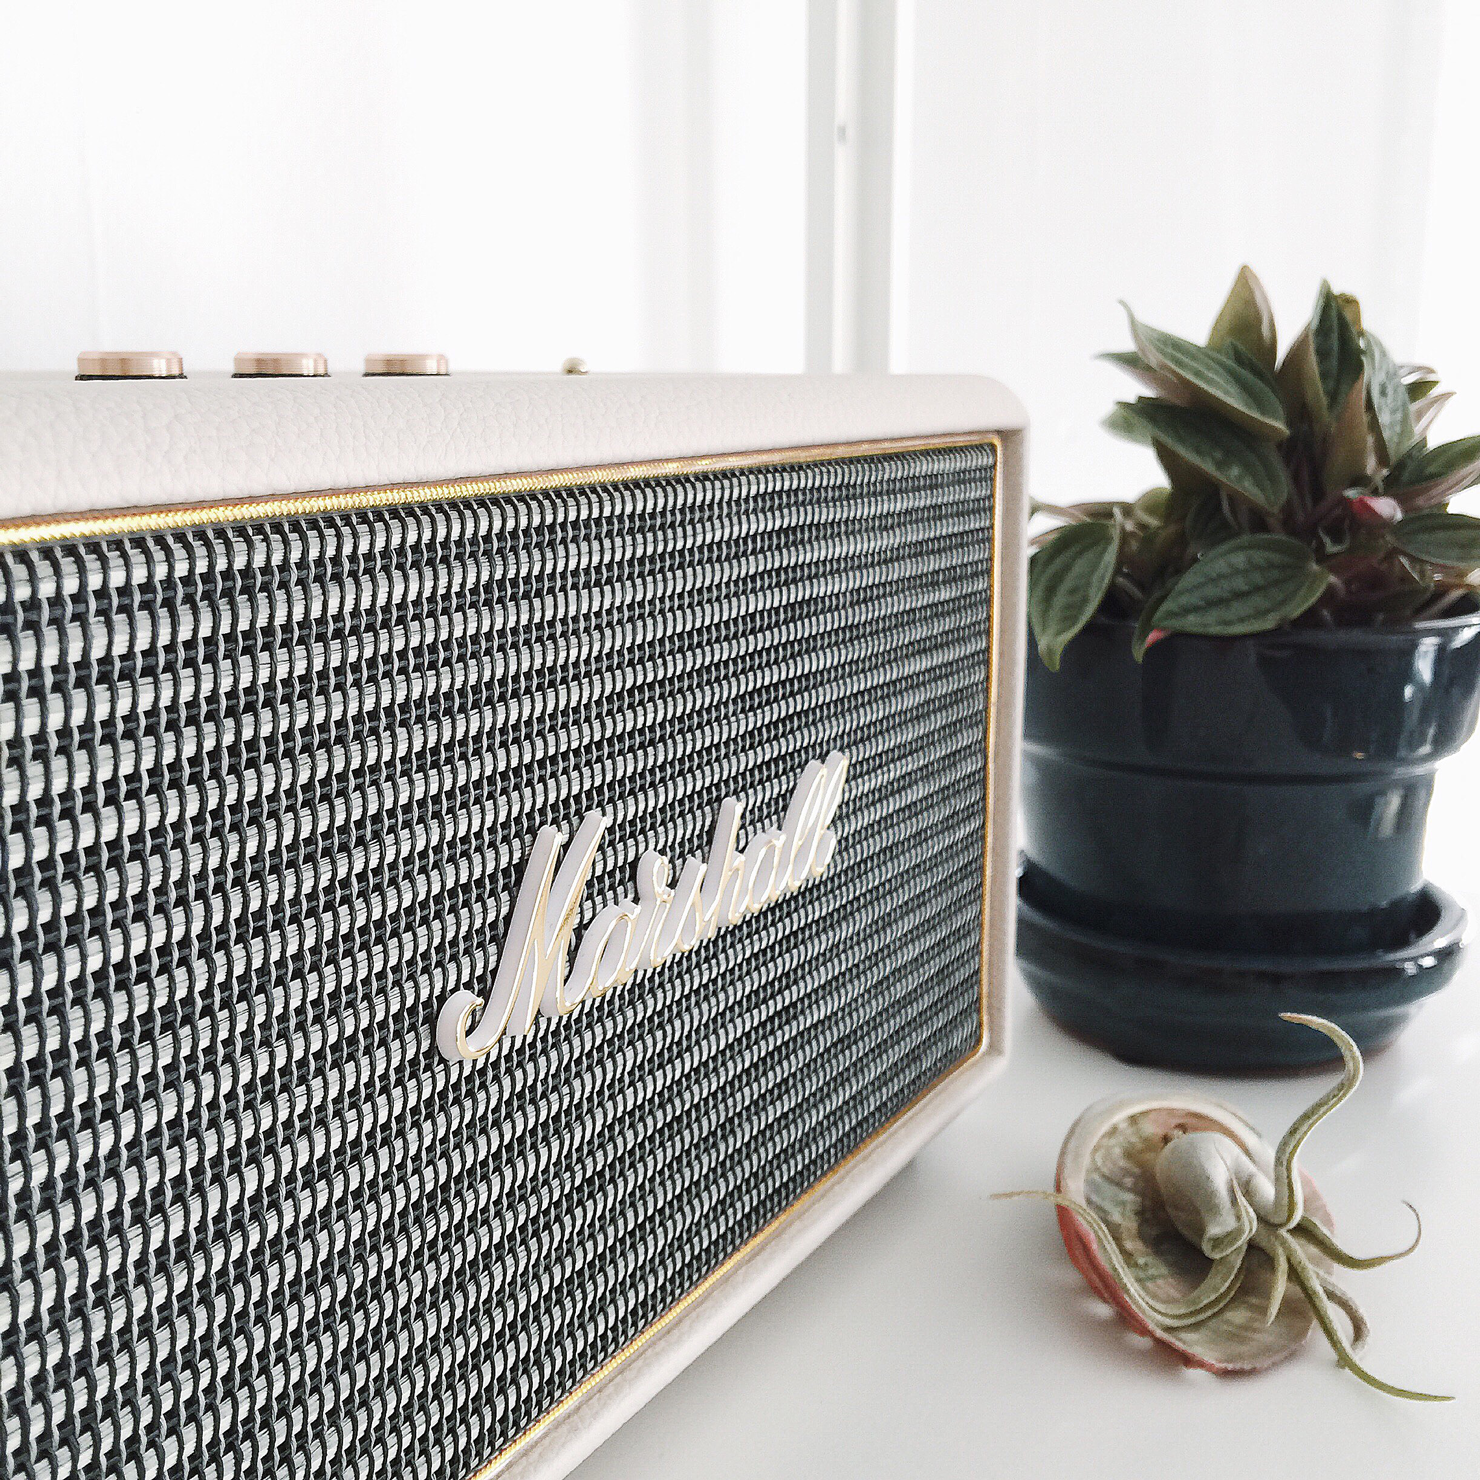 Marshall Acton speaker and a bunch of fun links! // Idle Hands Awake